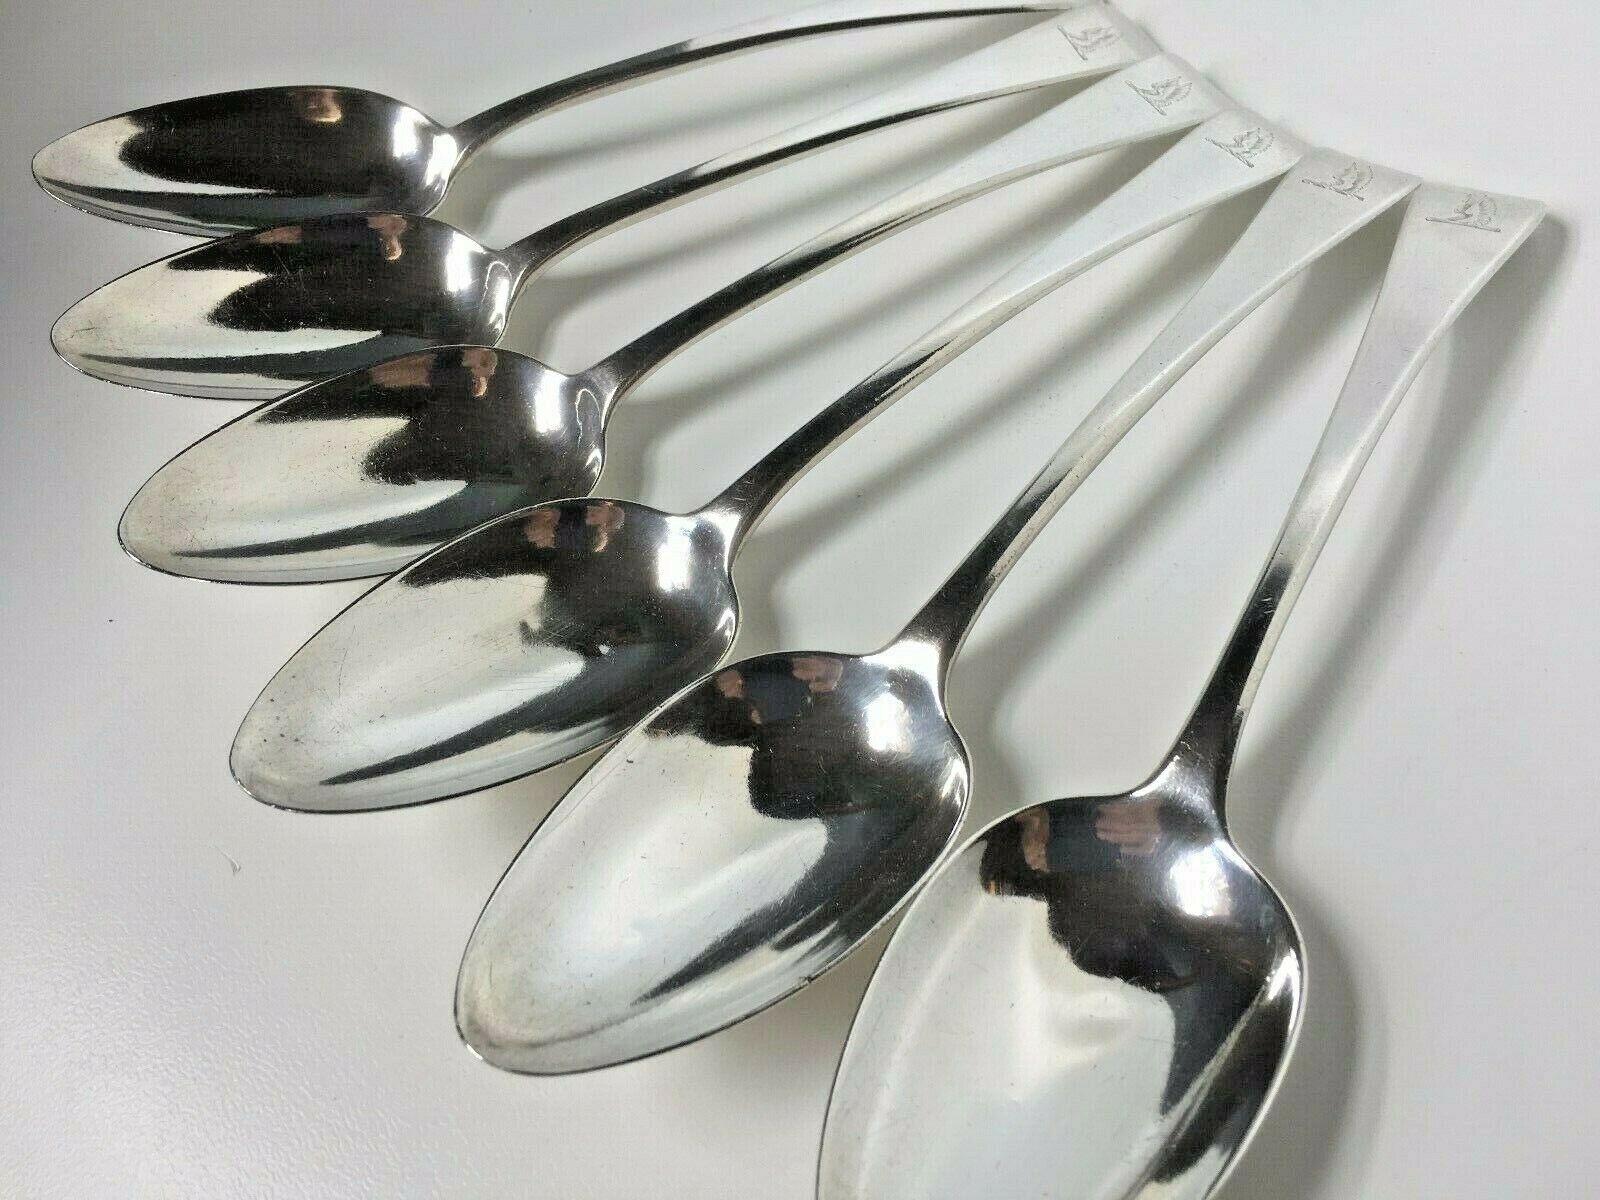 SIX LARGE GEORGIAN, d1811 'SERVING' SPOONS 'Double Winged Crested' Solid Silver